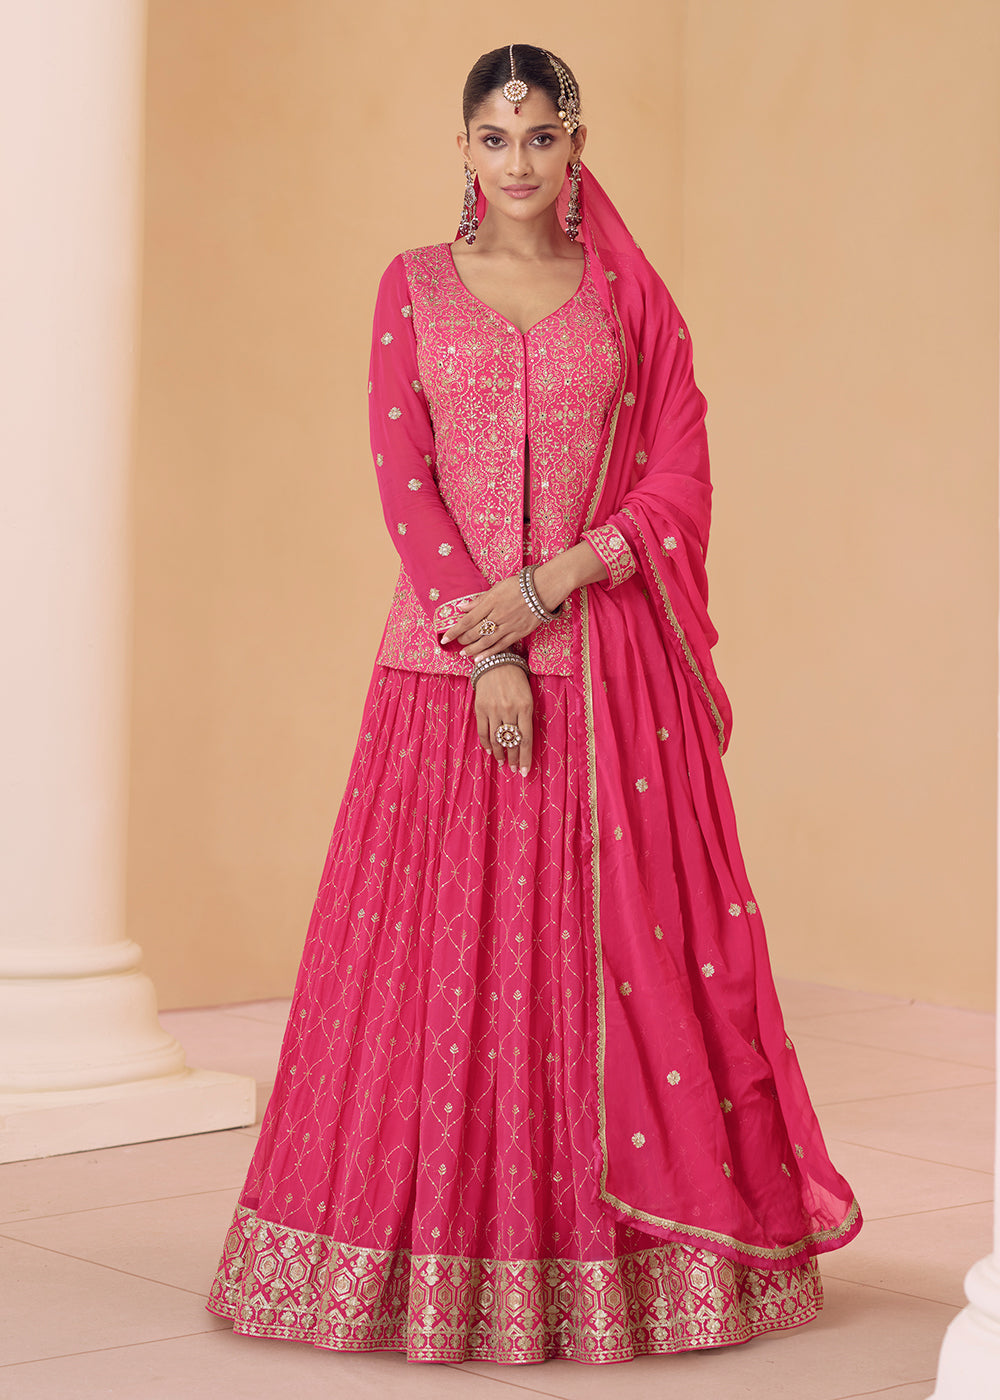 Ruby Red Georgette Wedding Lehenga Choli with Intricate Embroidery.